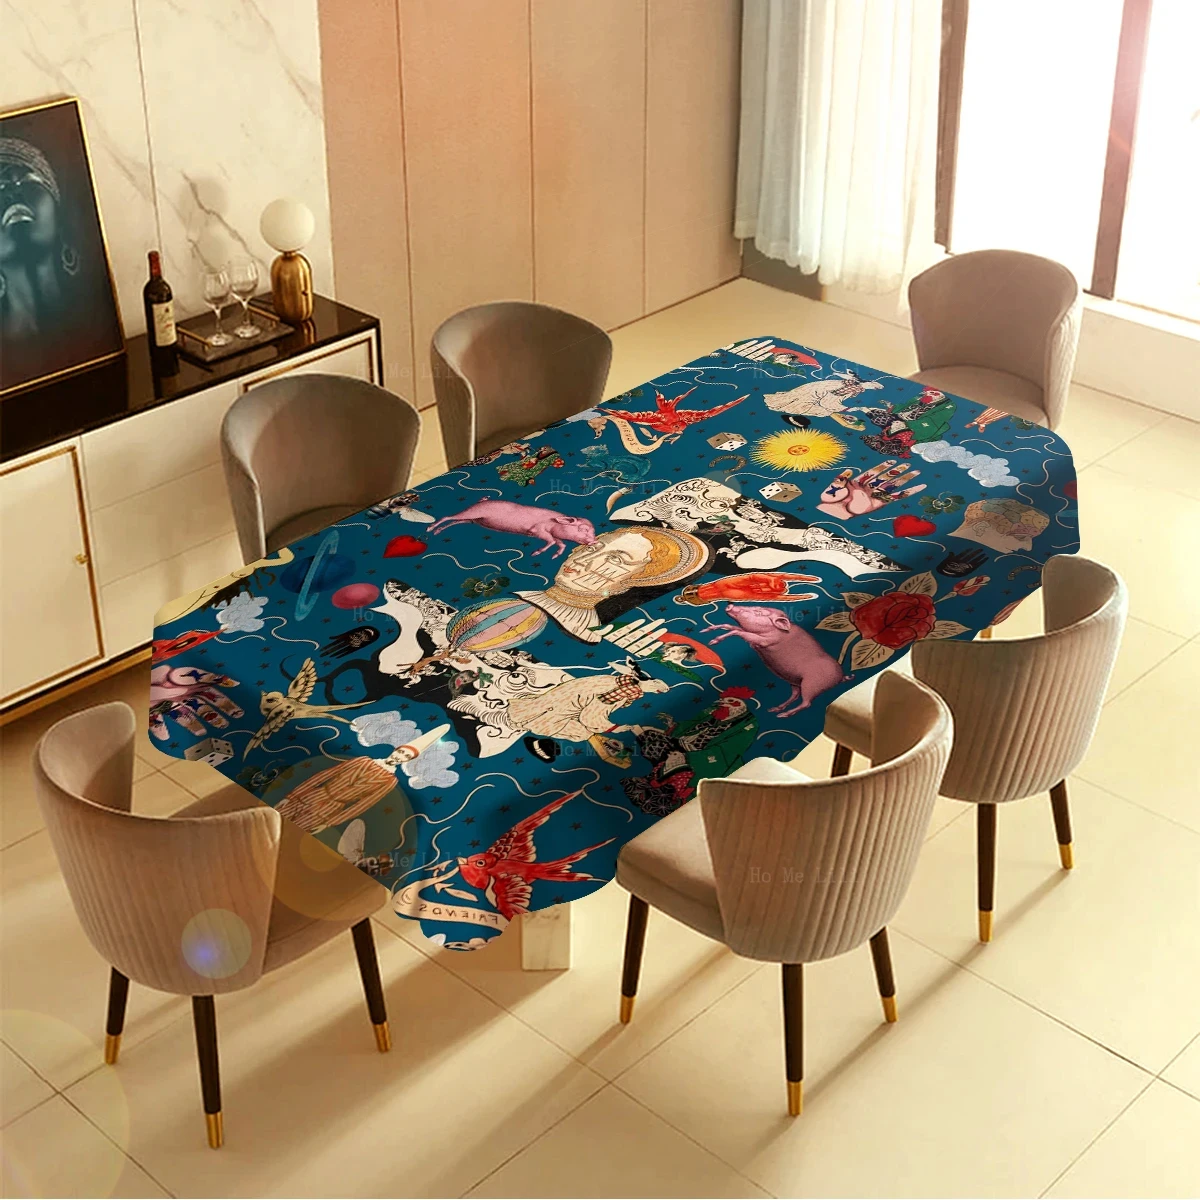 New Horizons The Solar System Illusionary Daytime Cute Fat Cat Dust Proof Tablecloth By Ho Me Lili For Table Decor